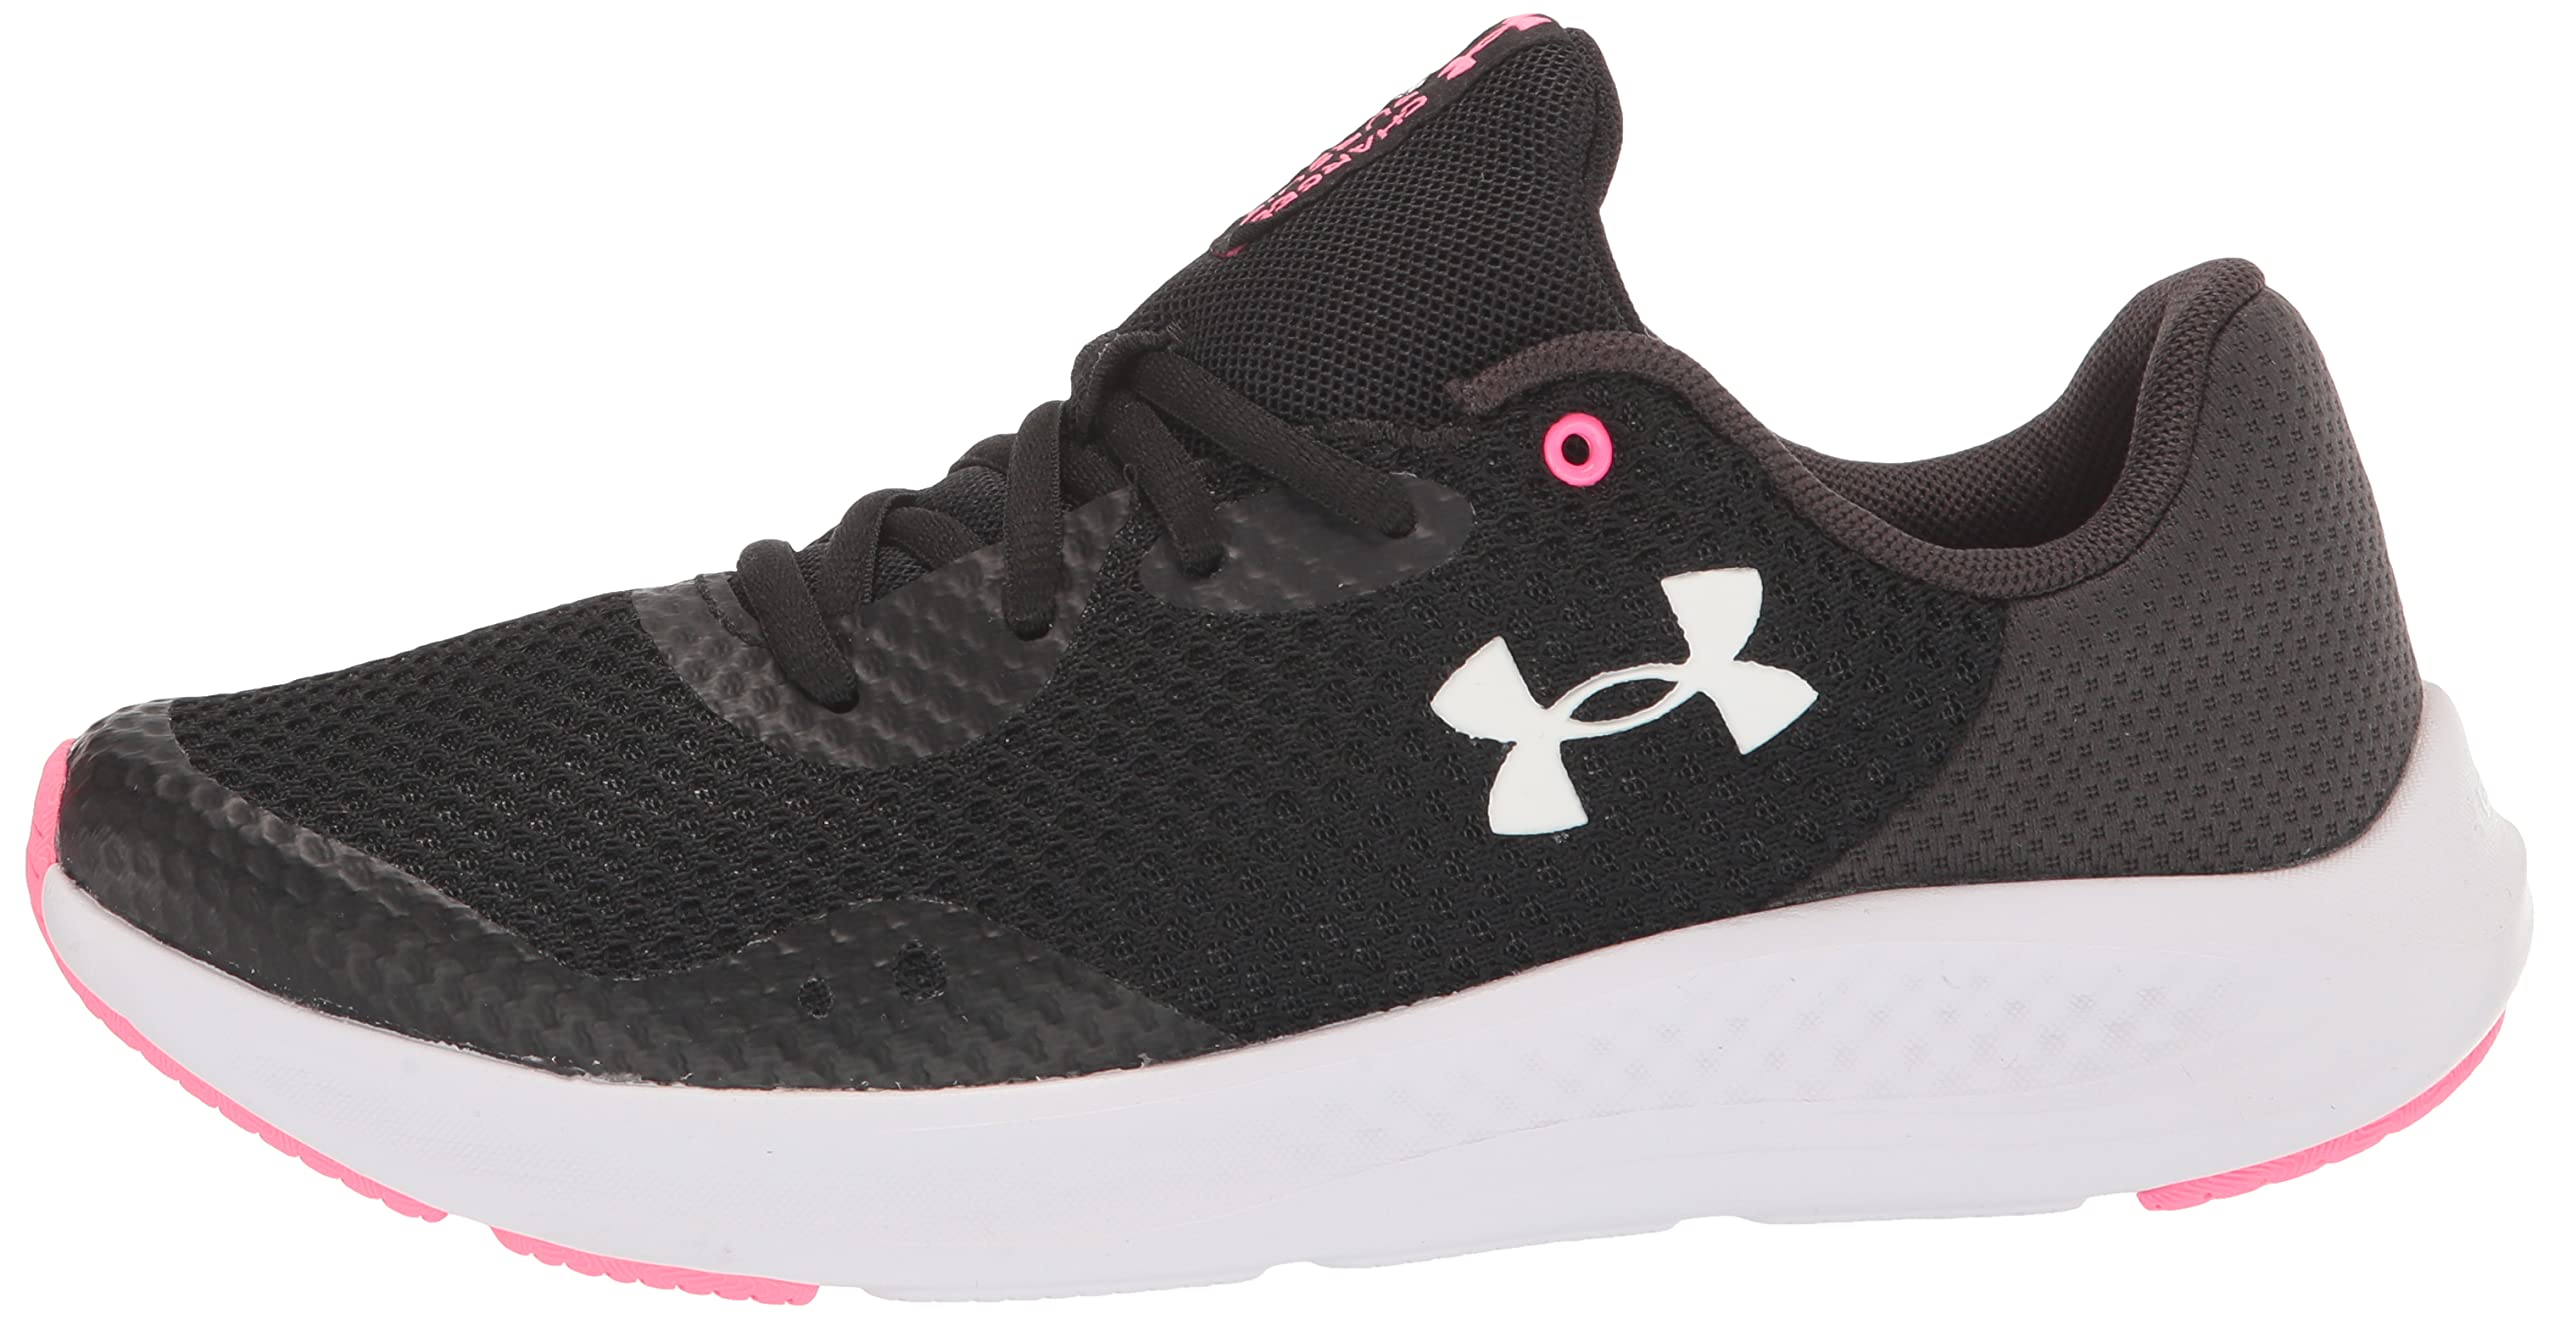 Under Armour Unisex-Child Charged Pursuit 3 Running Shoe